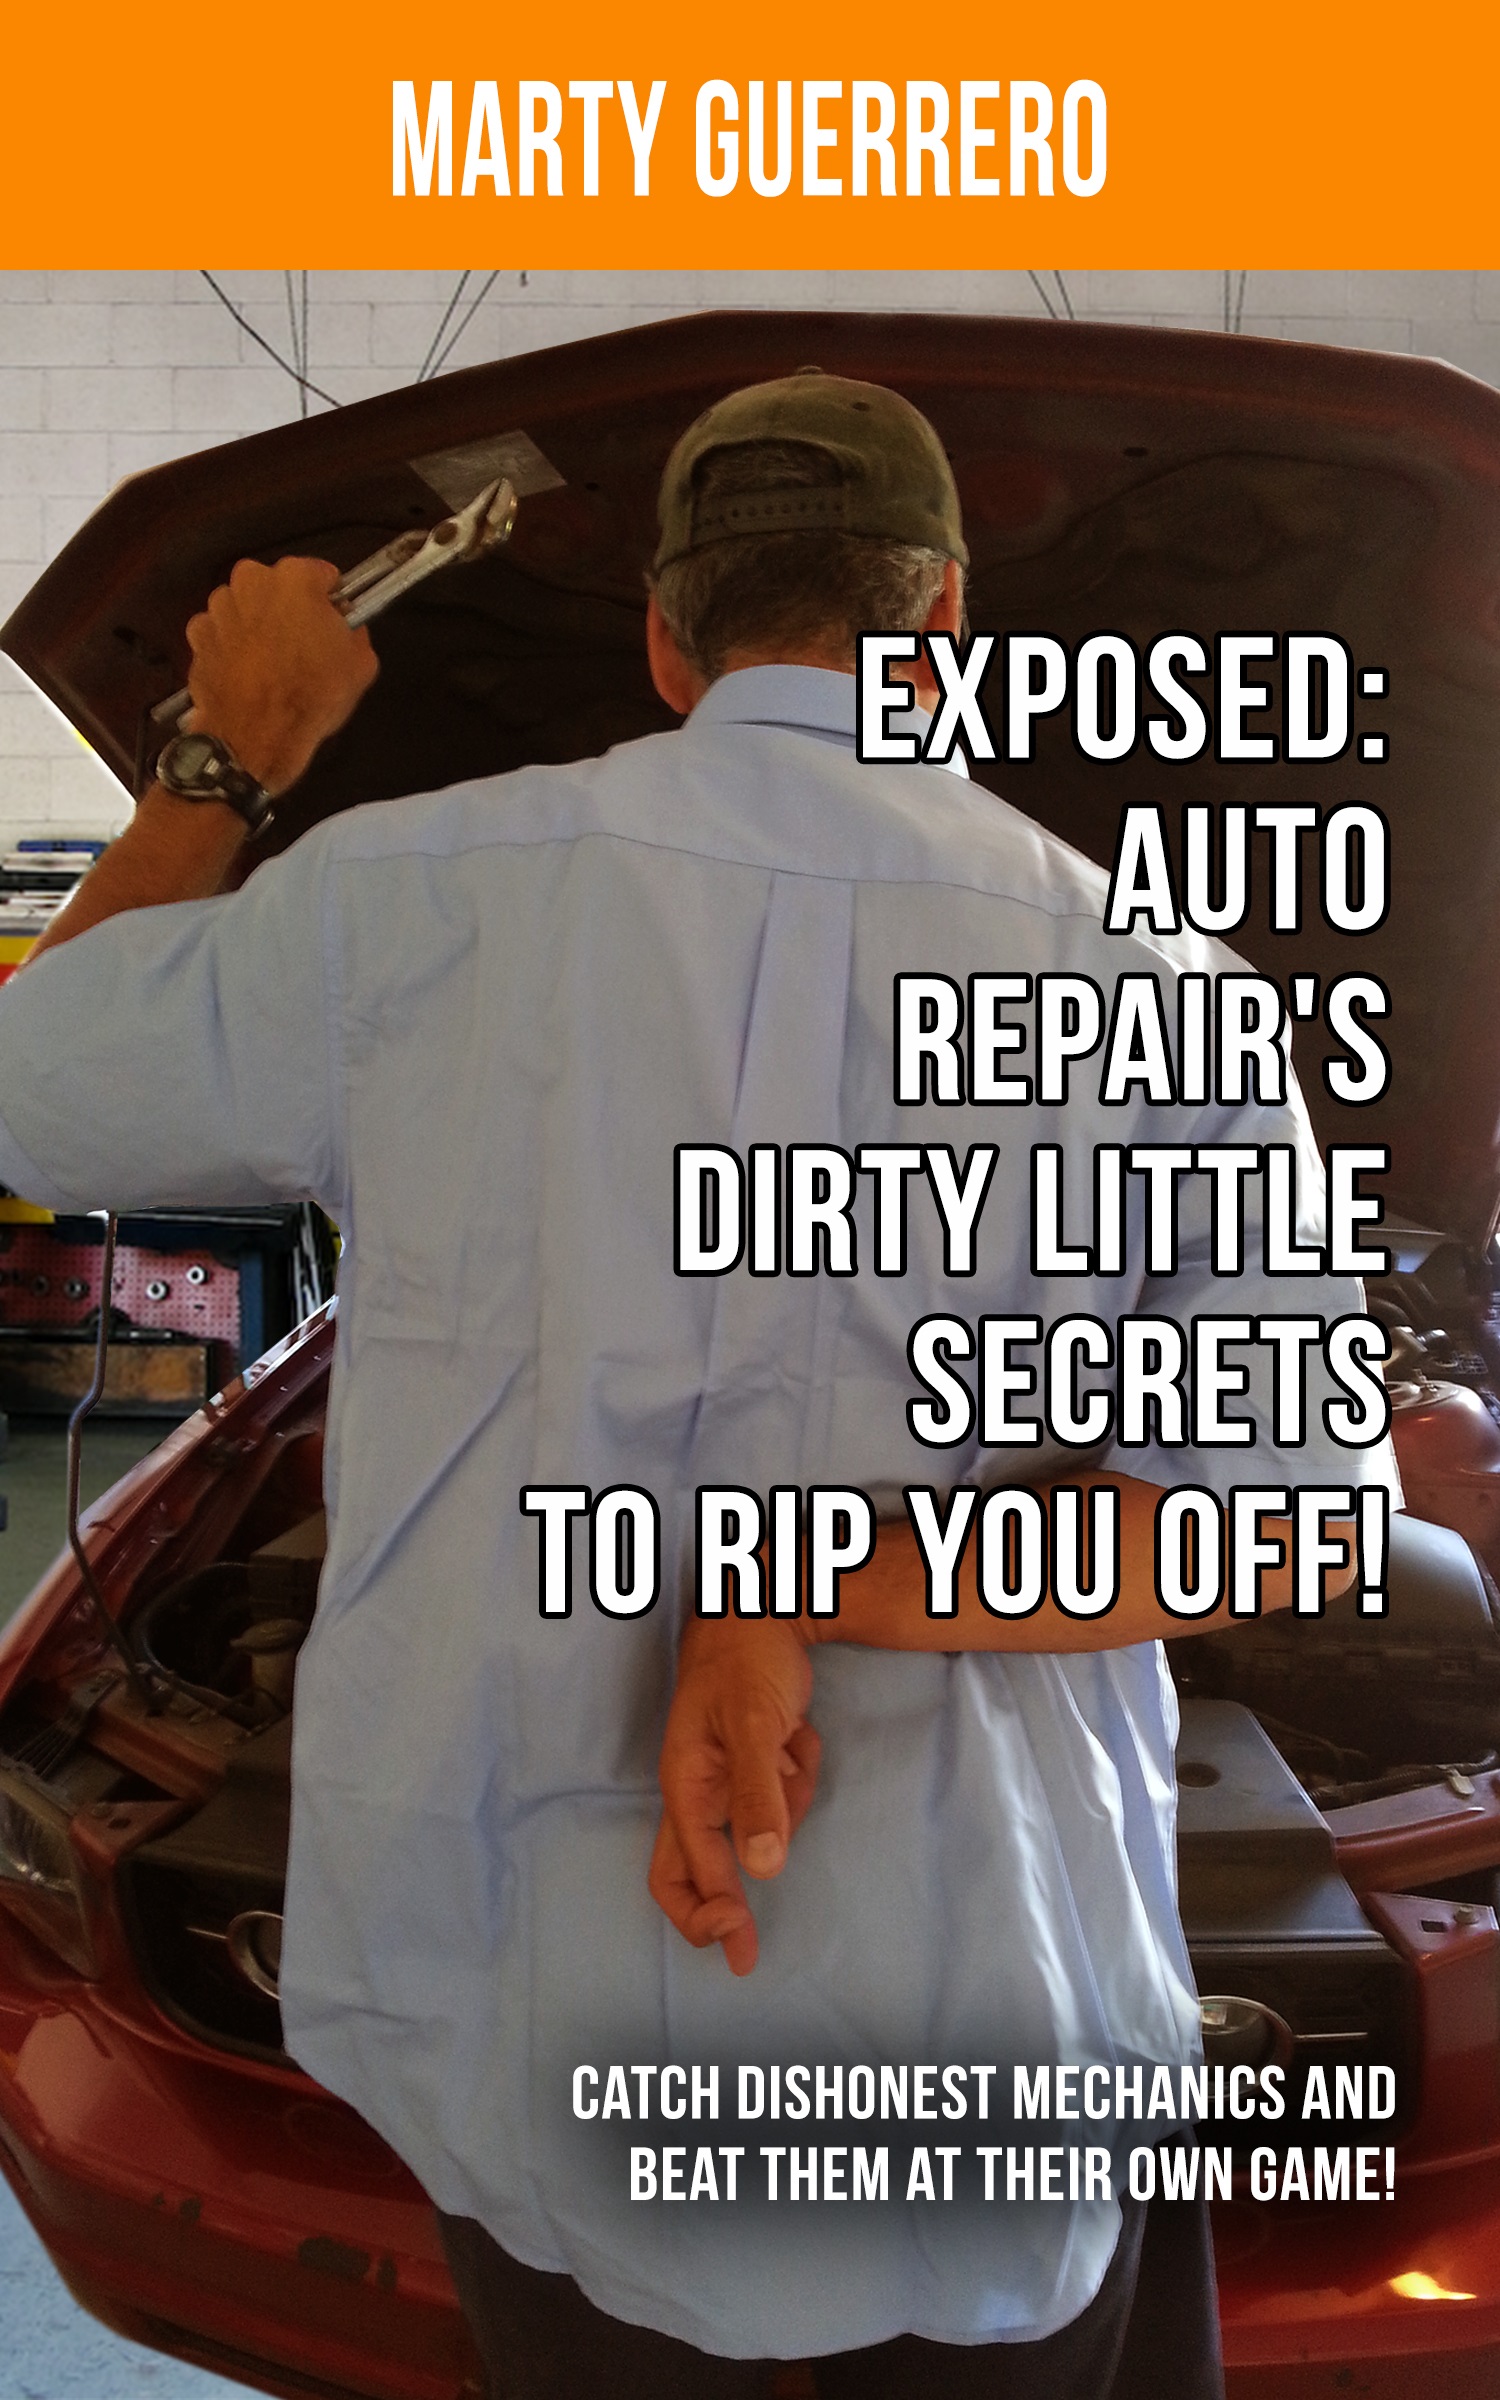 Exposed: Auto Repair’s Dirty Little Secrets to Rip You Off!